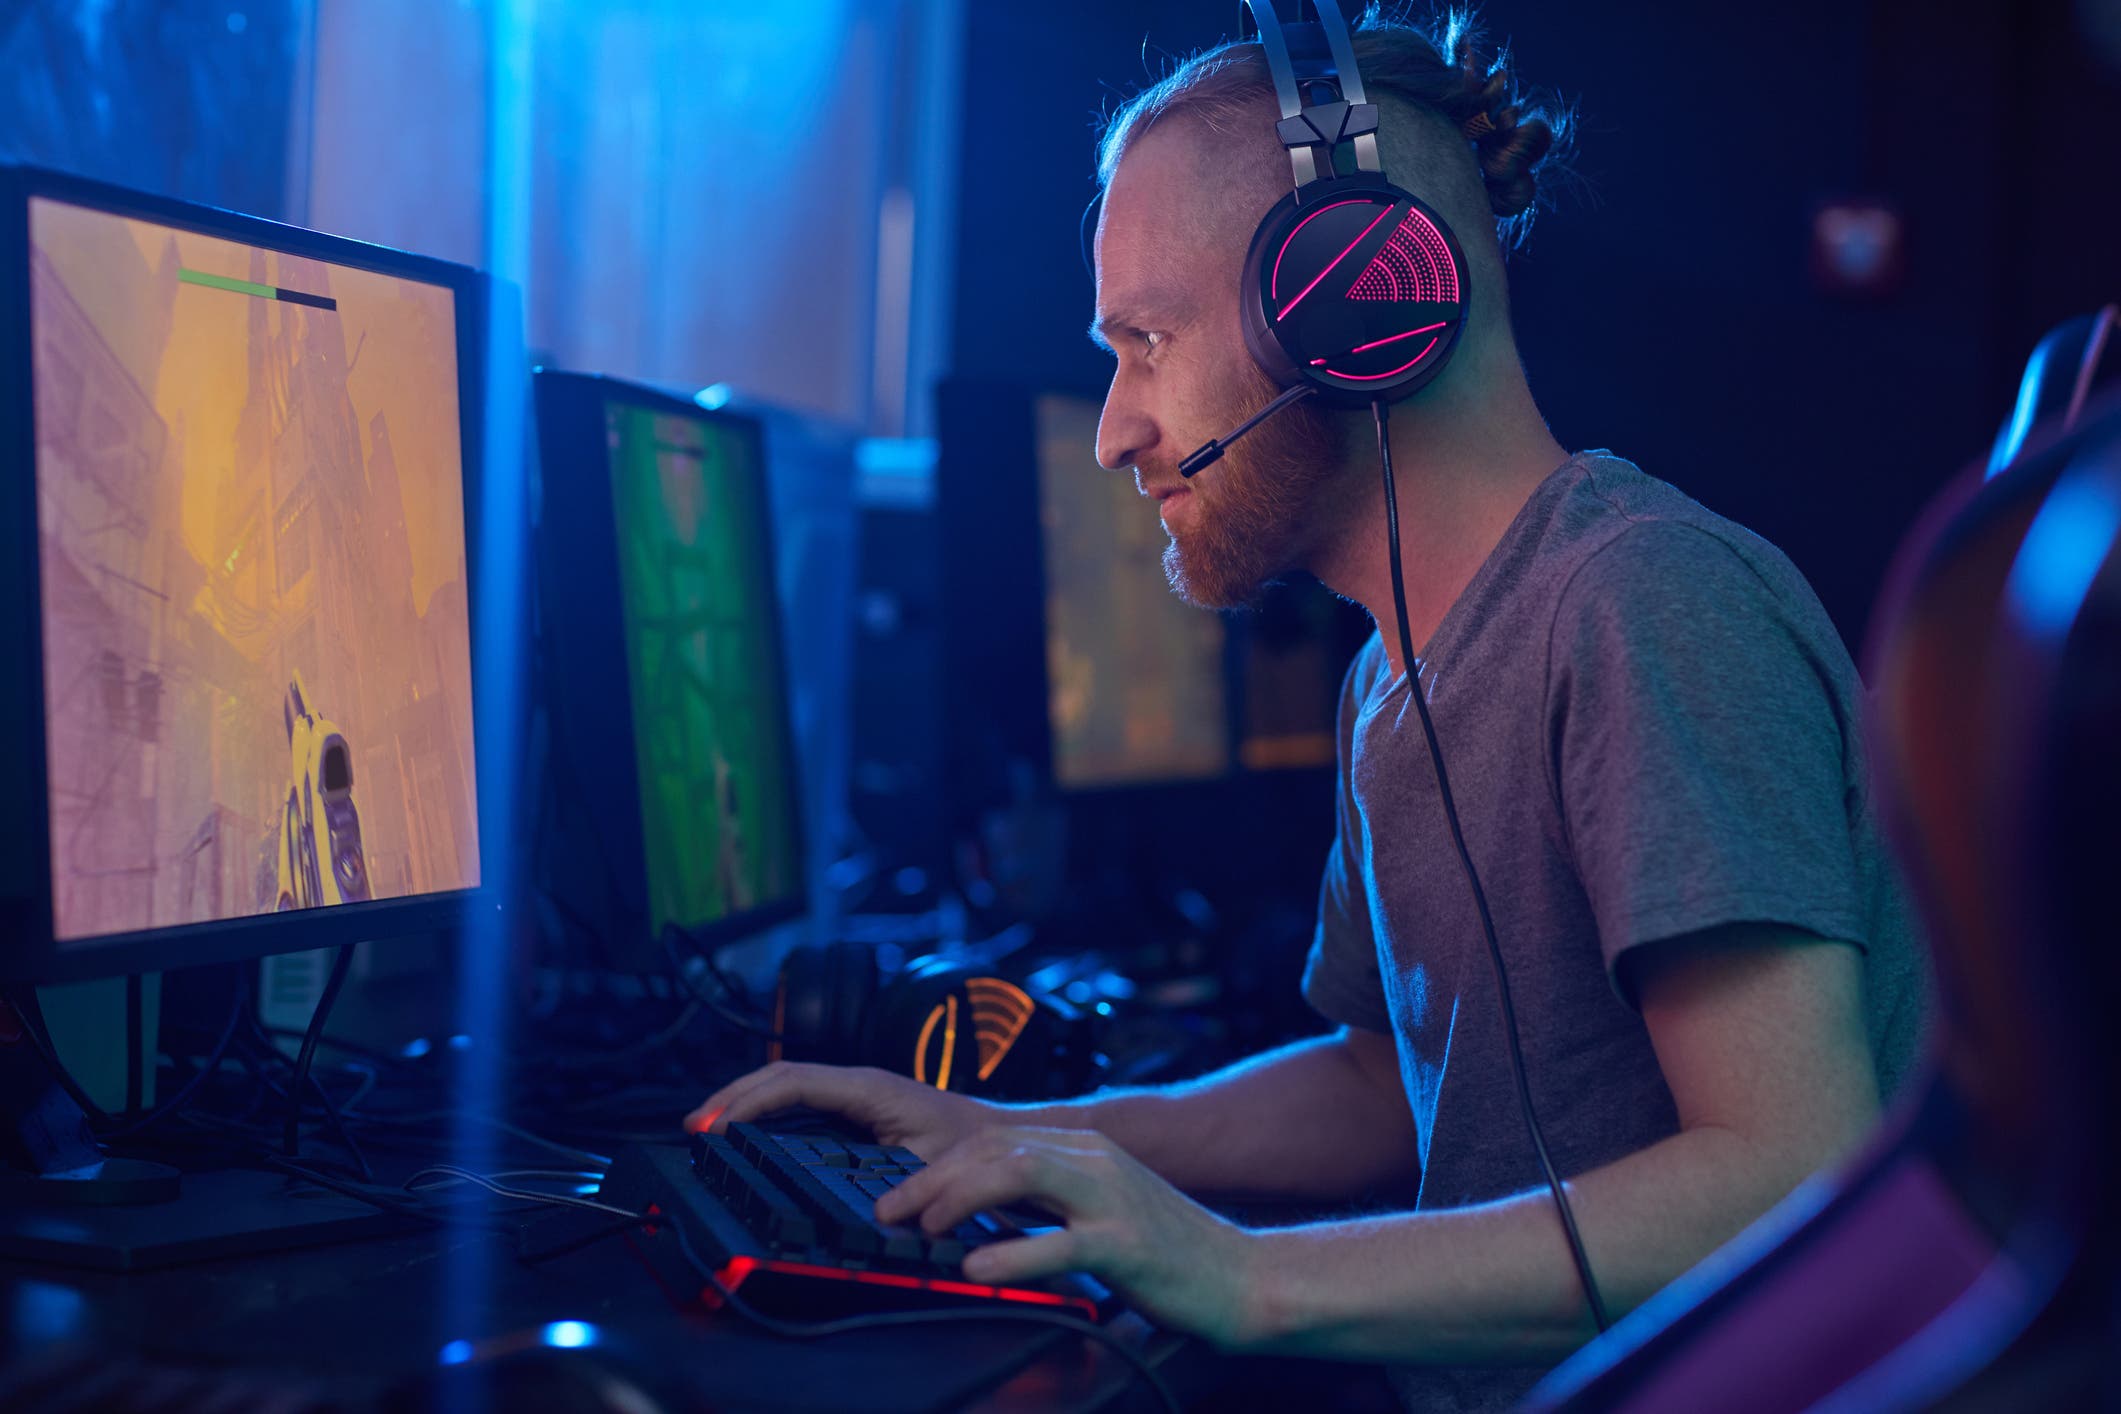 <p>Young bearded man in headphones looking at computer monitor and playing in computer game alone in dark room</p>
